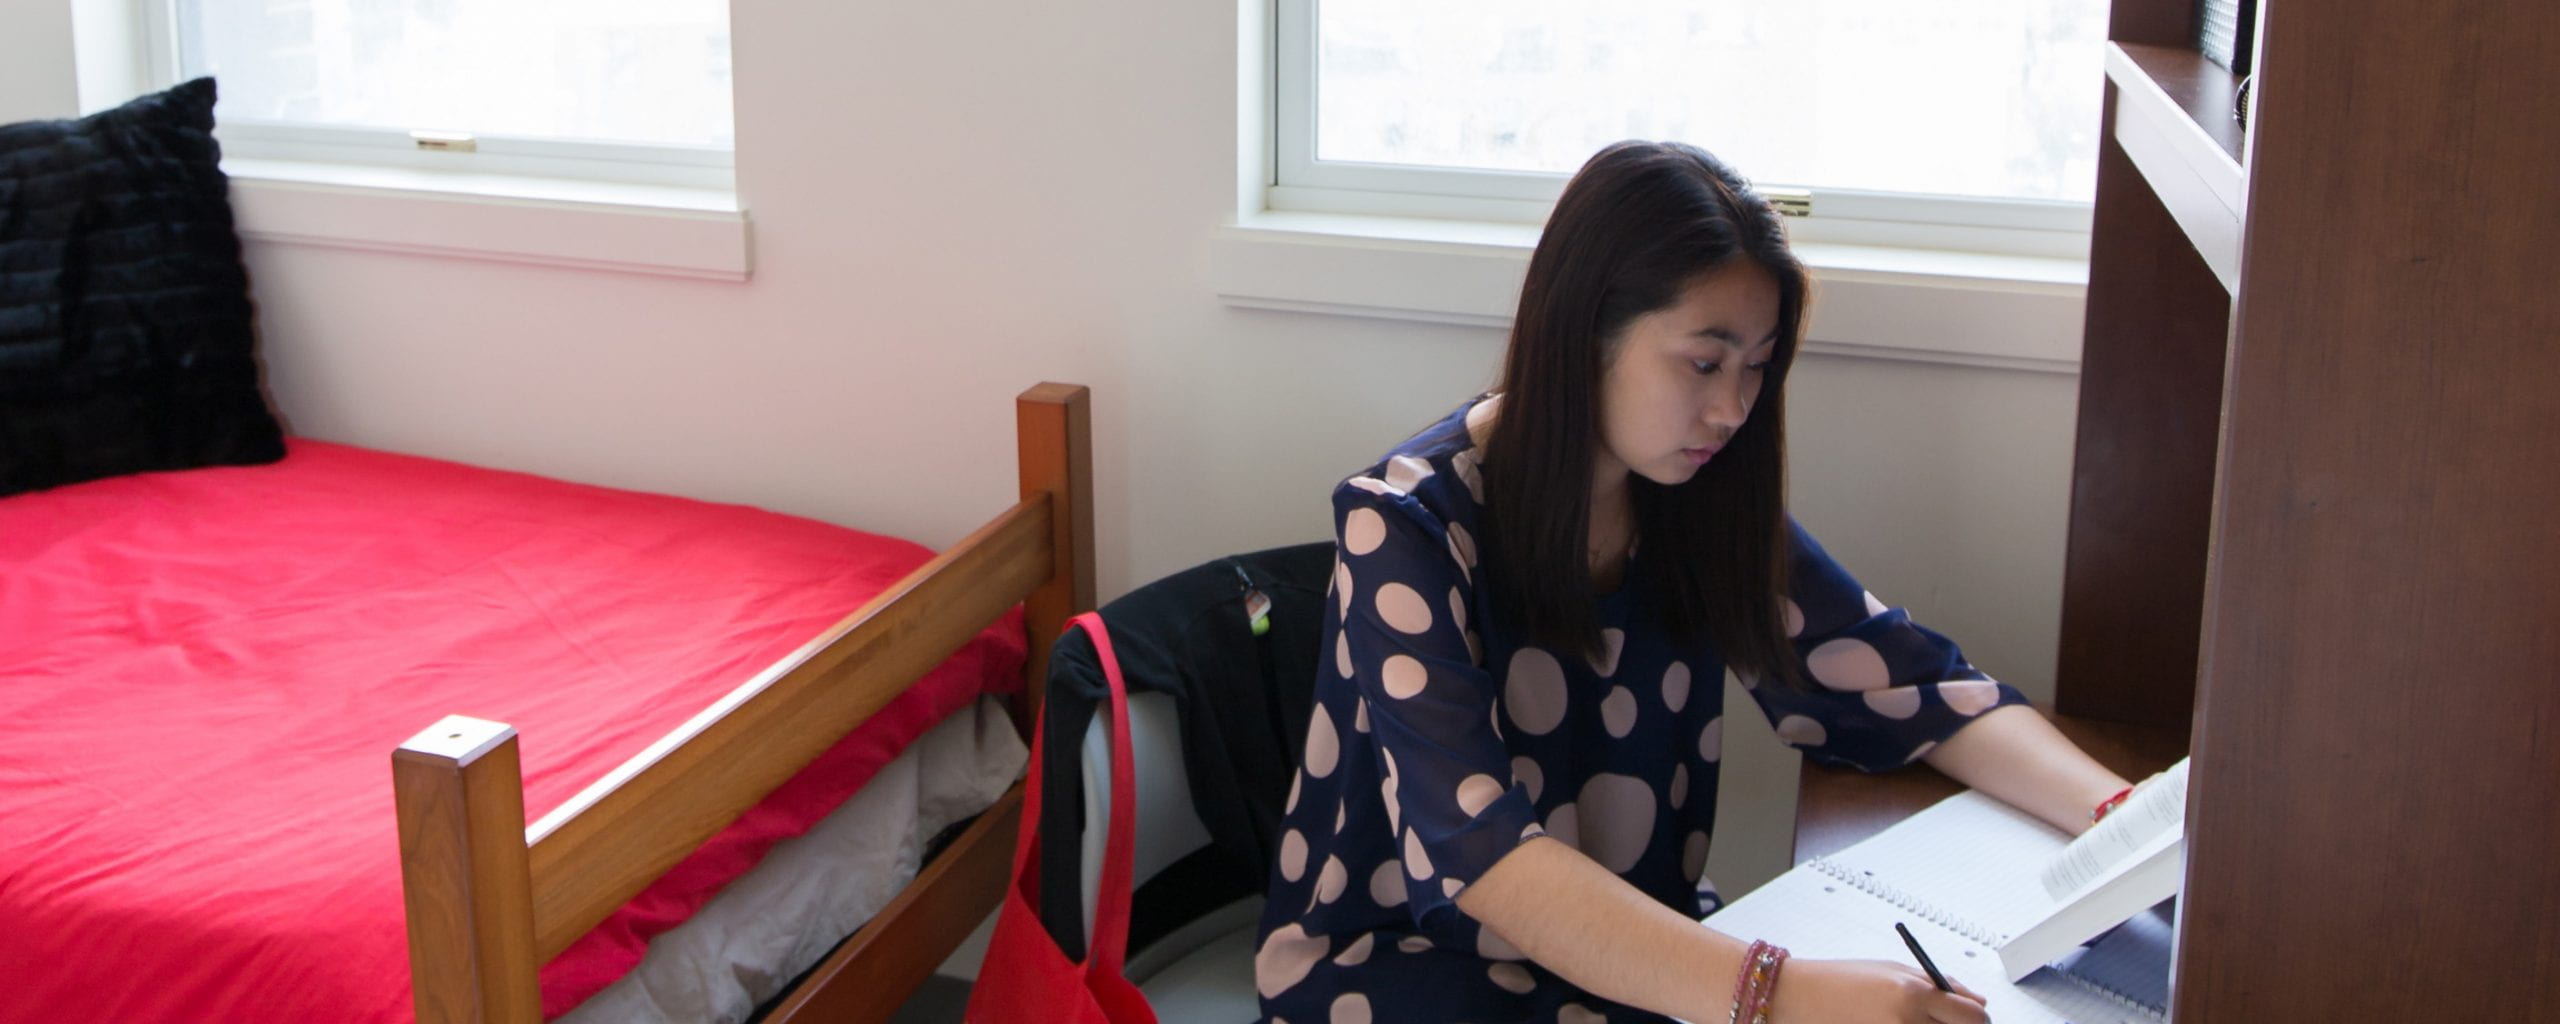 A woman completes paperwork at her home desk